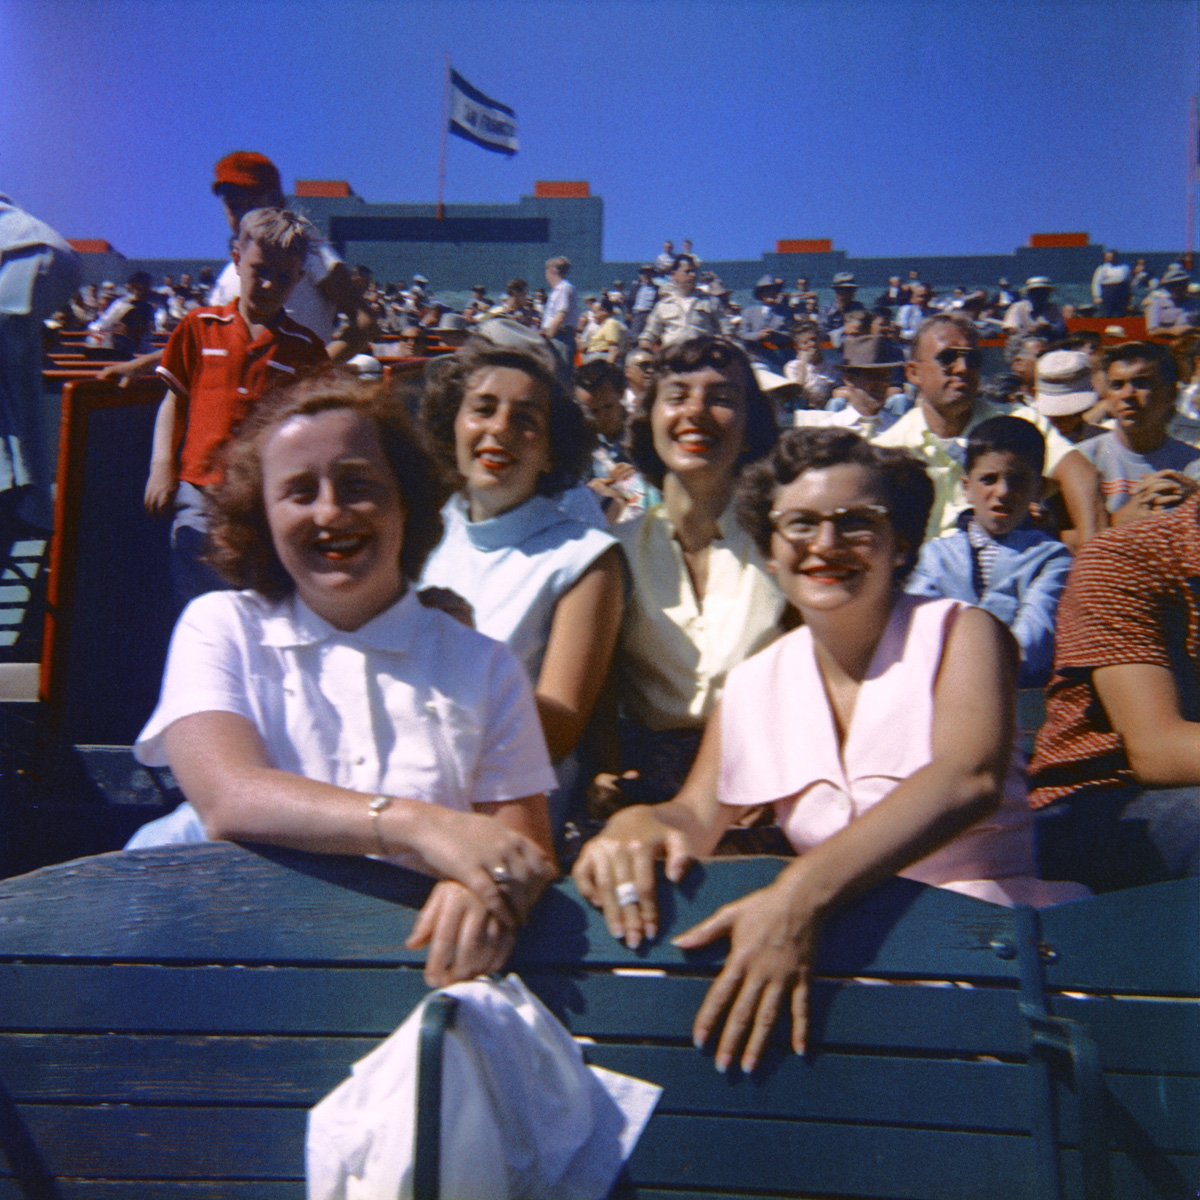 Seals Stadium, San Francisco, August 1953. My sister (third gal from left) and her friends at the ballpark to watch the San Francisco Seals play. Five years later the Giants came to town, and in 1959 Seals Stadium was demolished. From a 2-1/4 square Kodacolor negative. View full size.